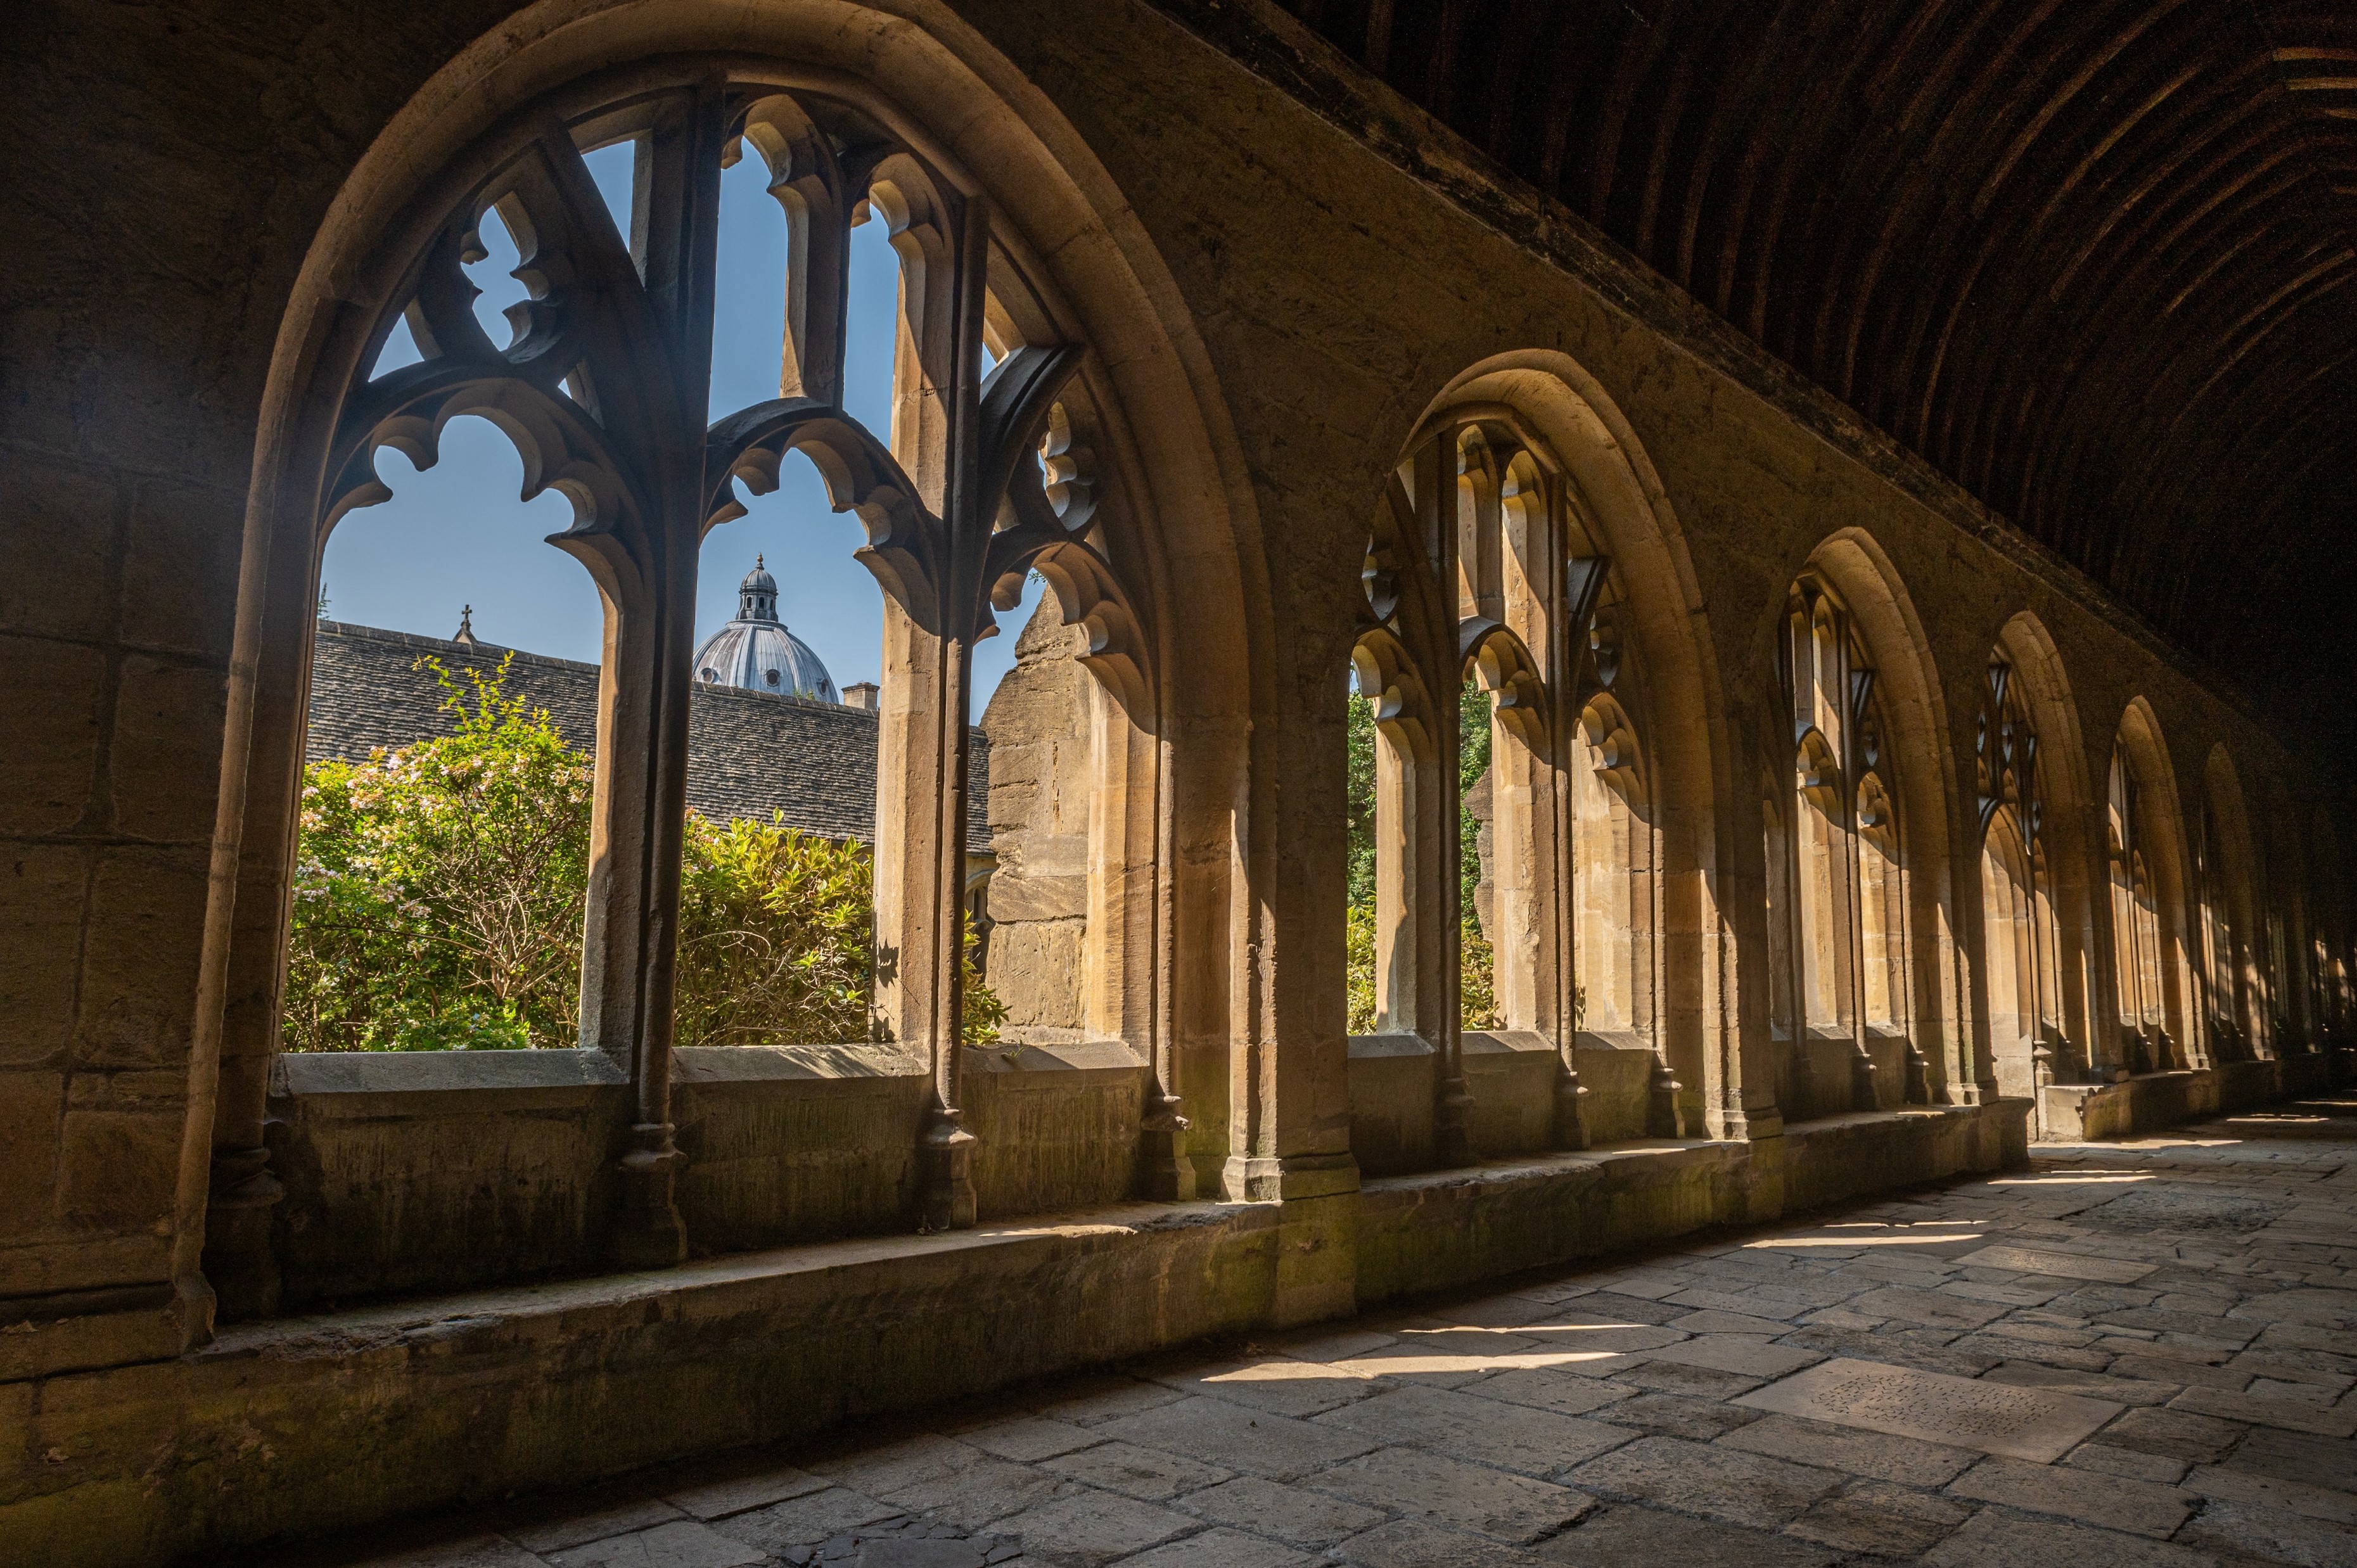 Open windows in the Cloisters